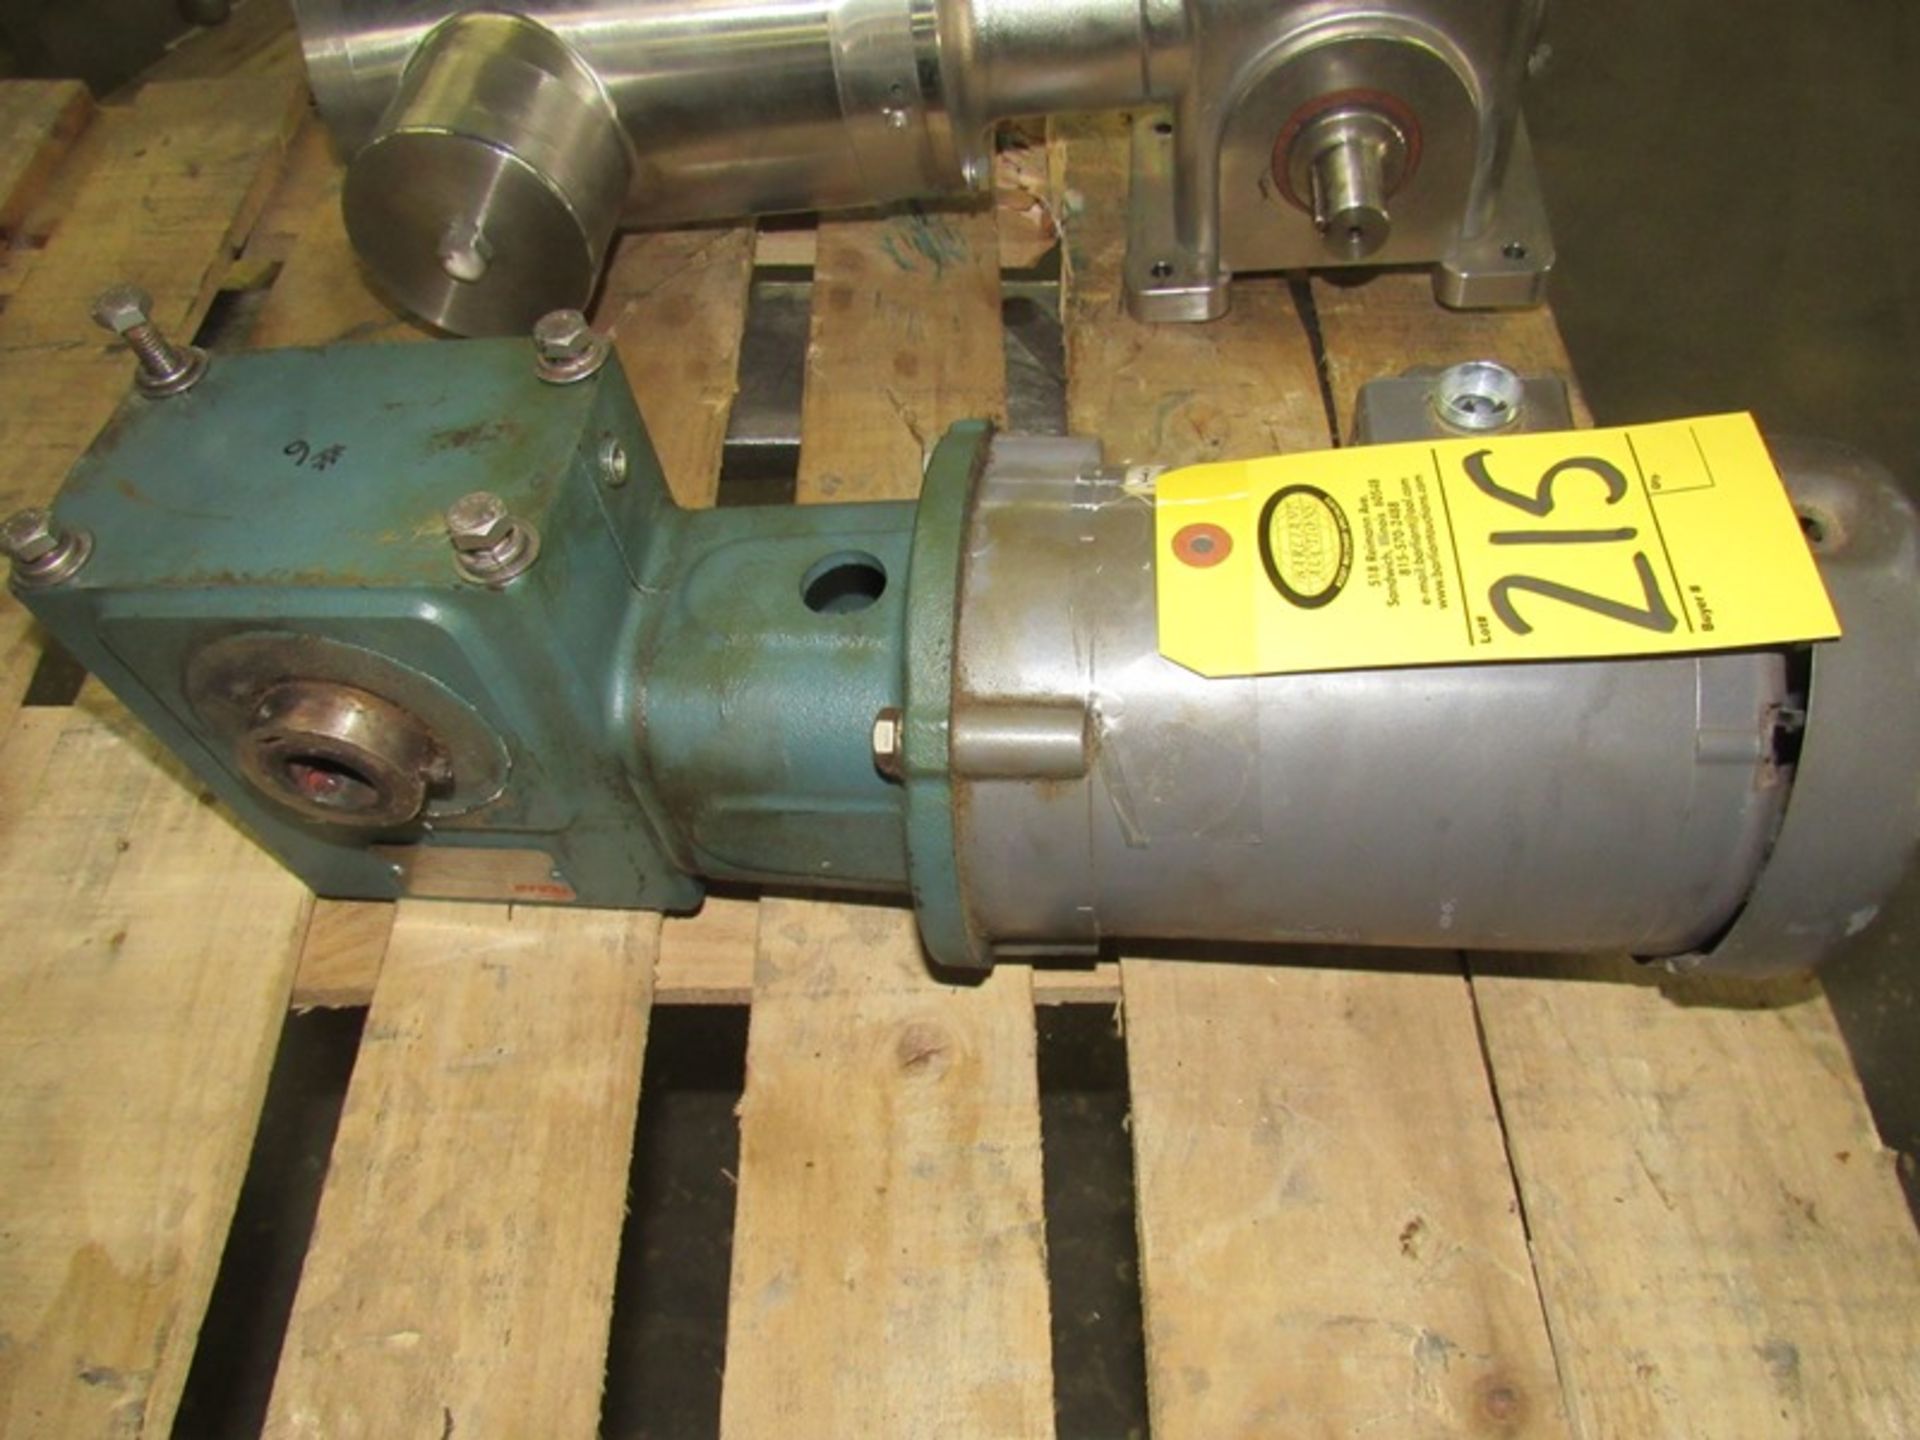 Baldor Industrial Motor, 56C frame, 230/460 VAC, 3 phase, RPM 1725 , .75 h.p., Dodge Tigear Gearbox, - Image 2 of 2